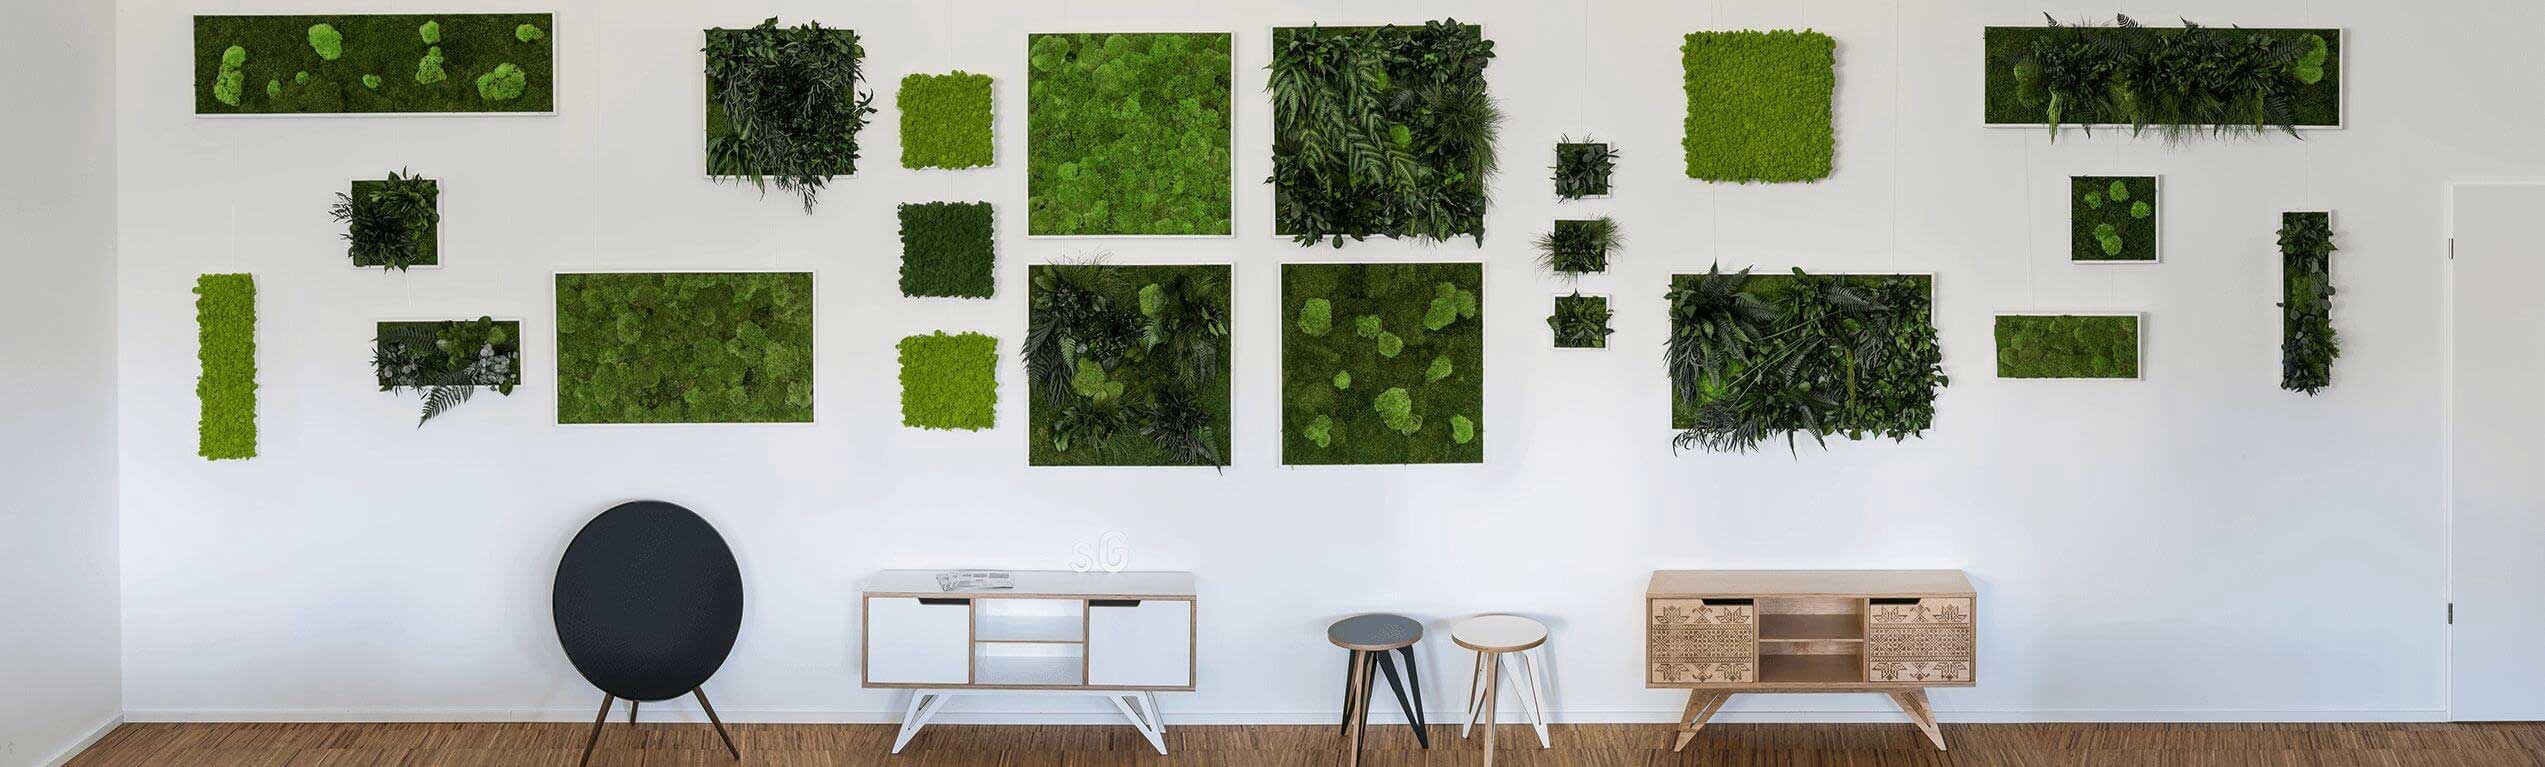 Moss Pictures And Plant Pictures Without Maintenance